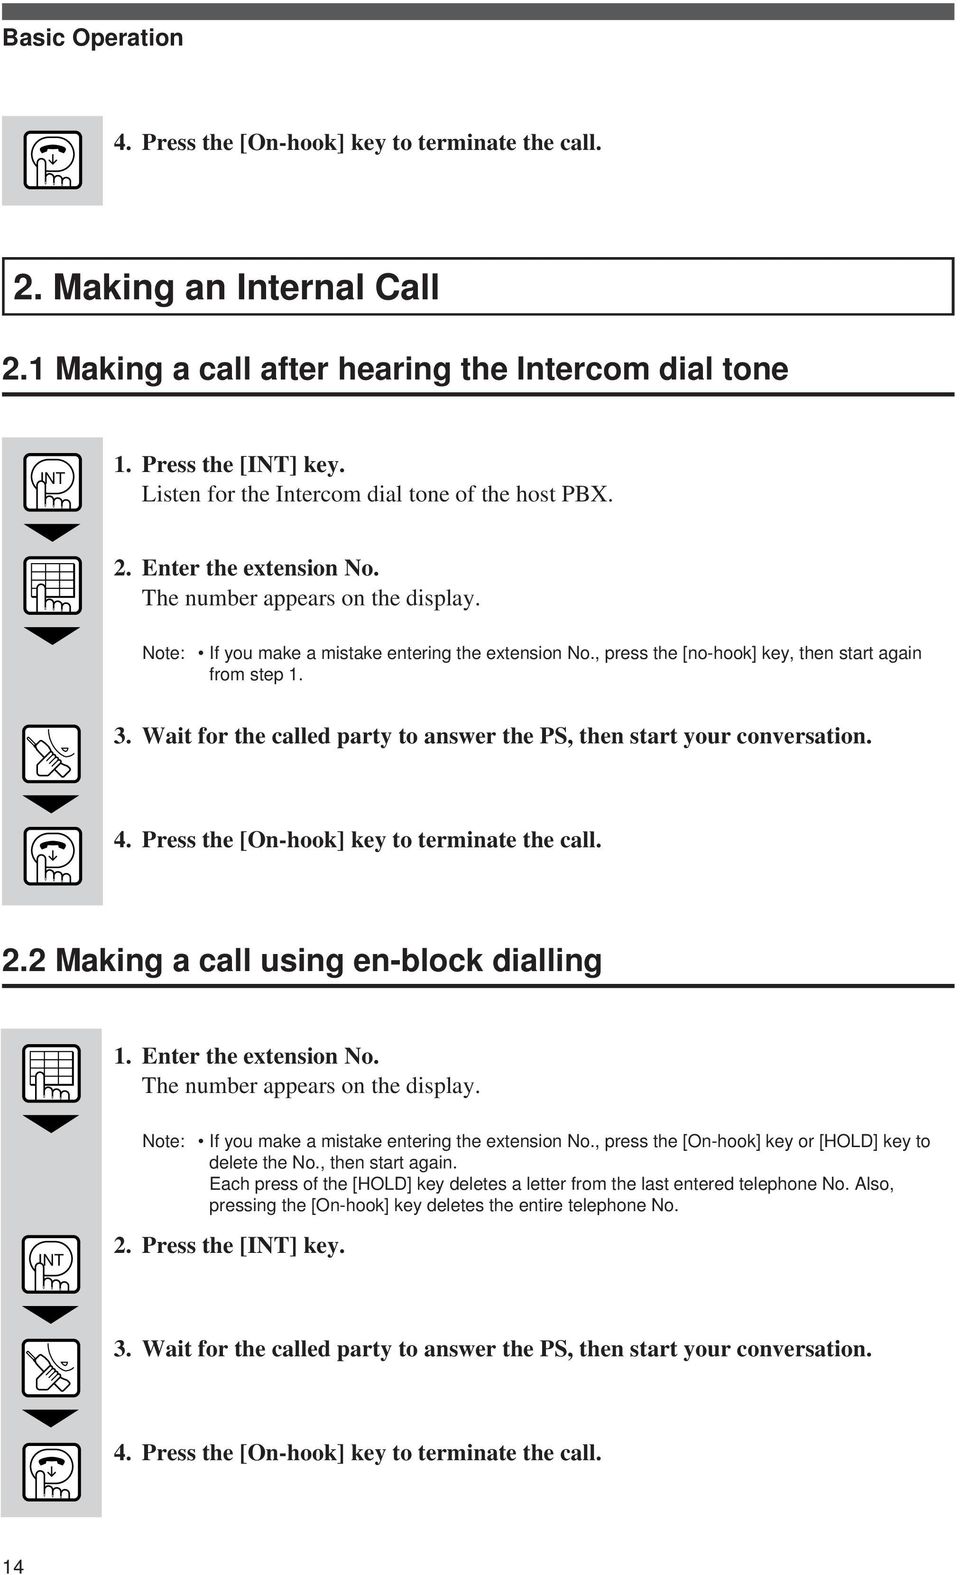 , press the [no-hook] key, then start again from step 1. 3. Wait for the called party to answer the PS, then start your conversation. 4. Press the [On-hook] key to terminate the call. 2.